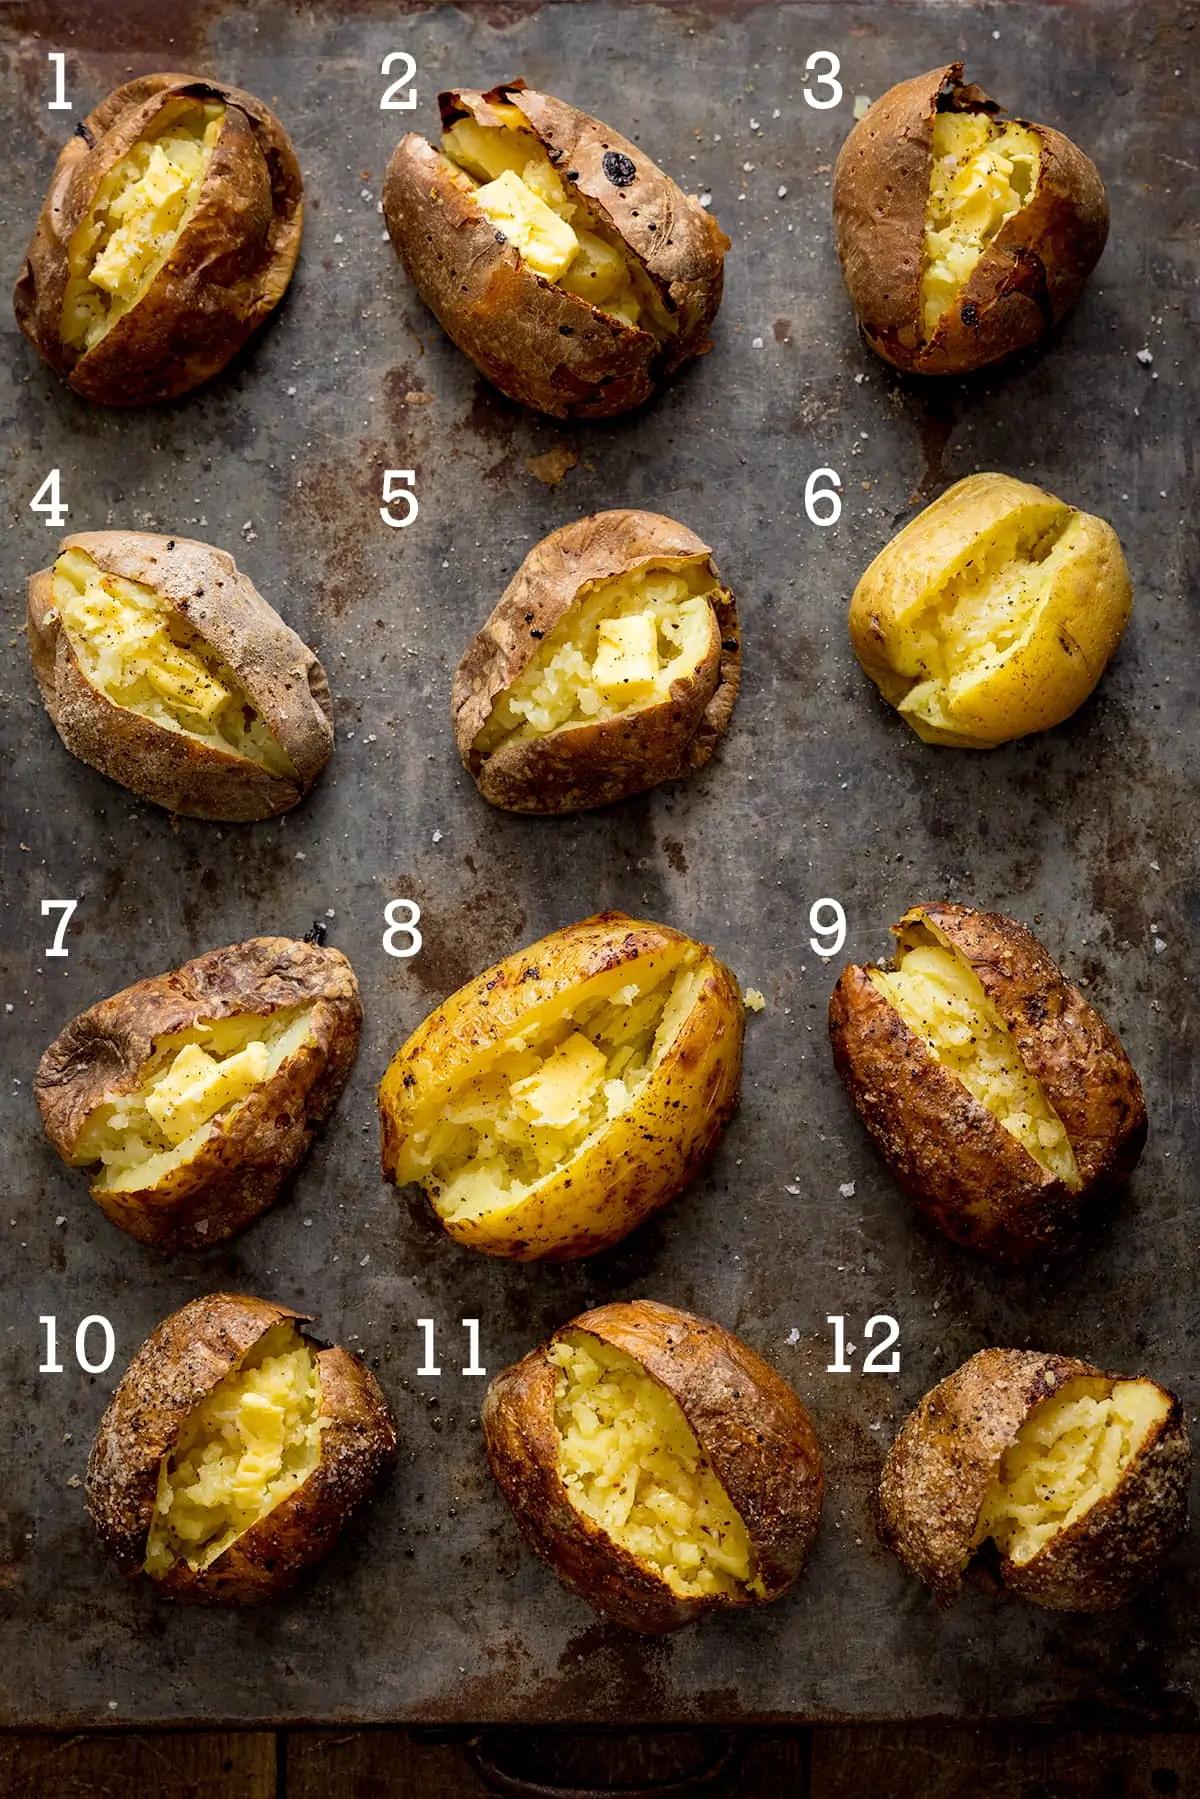 12 open baked potatoes on a metal tray - each with a number from one to ten.